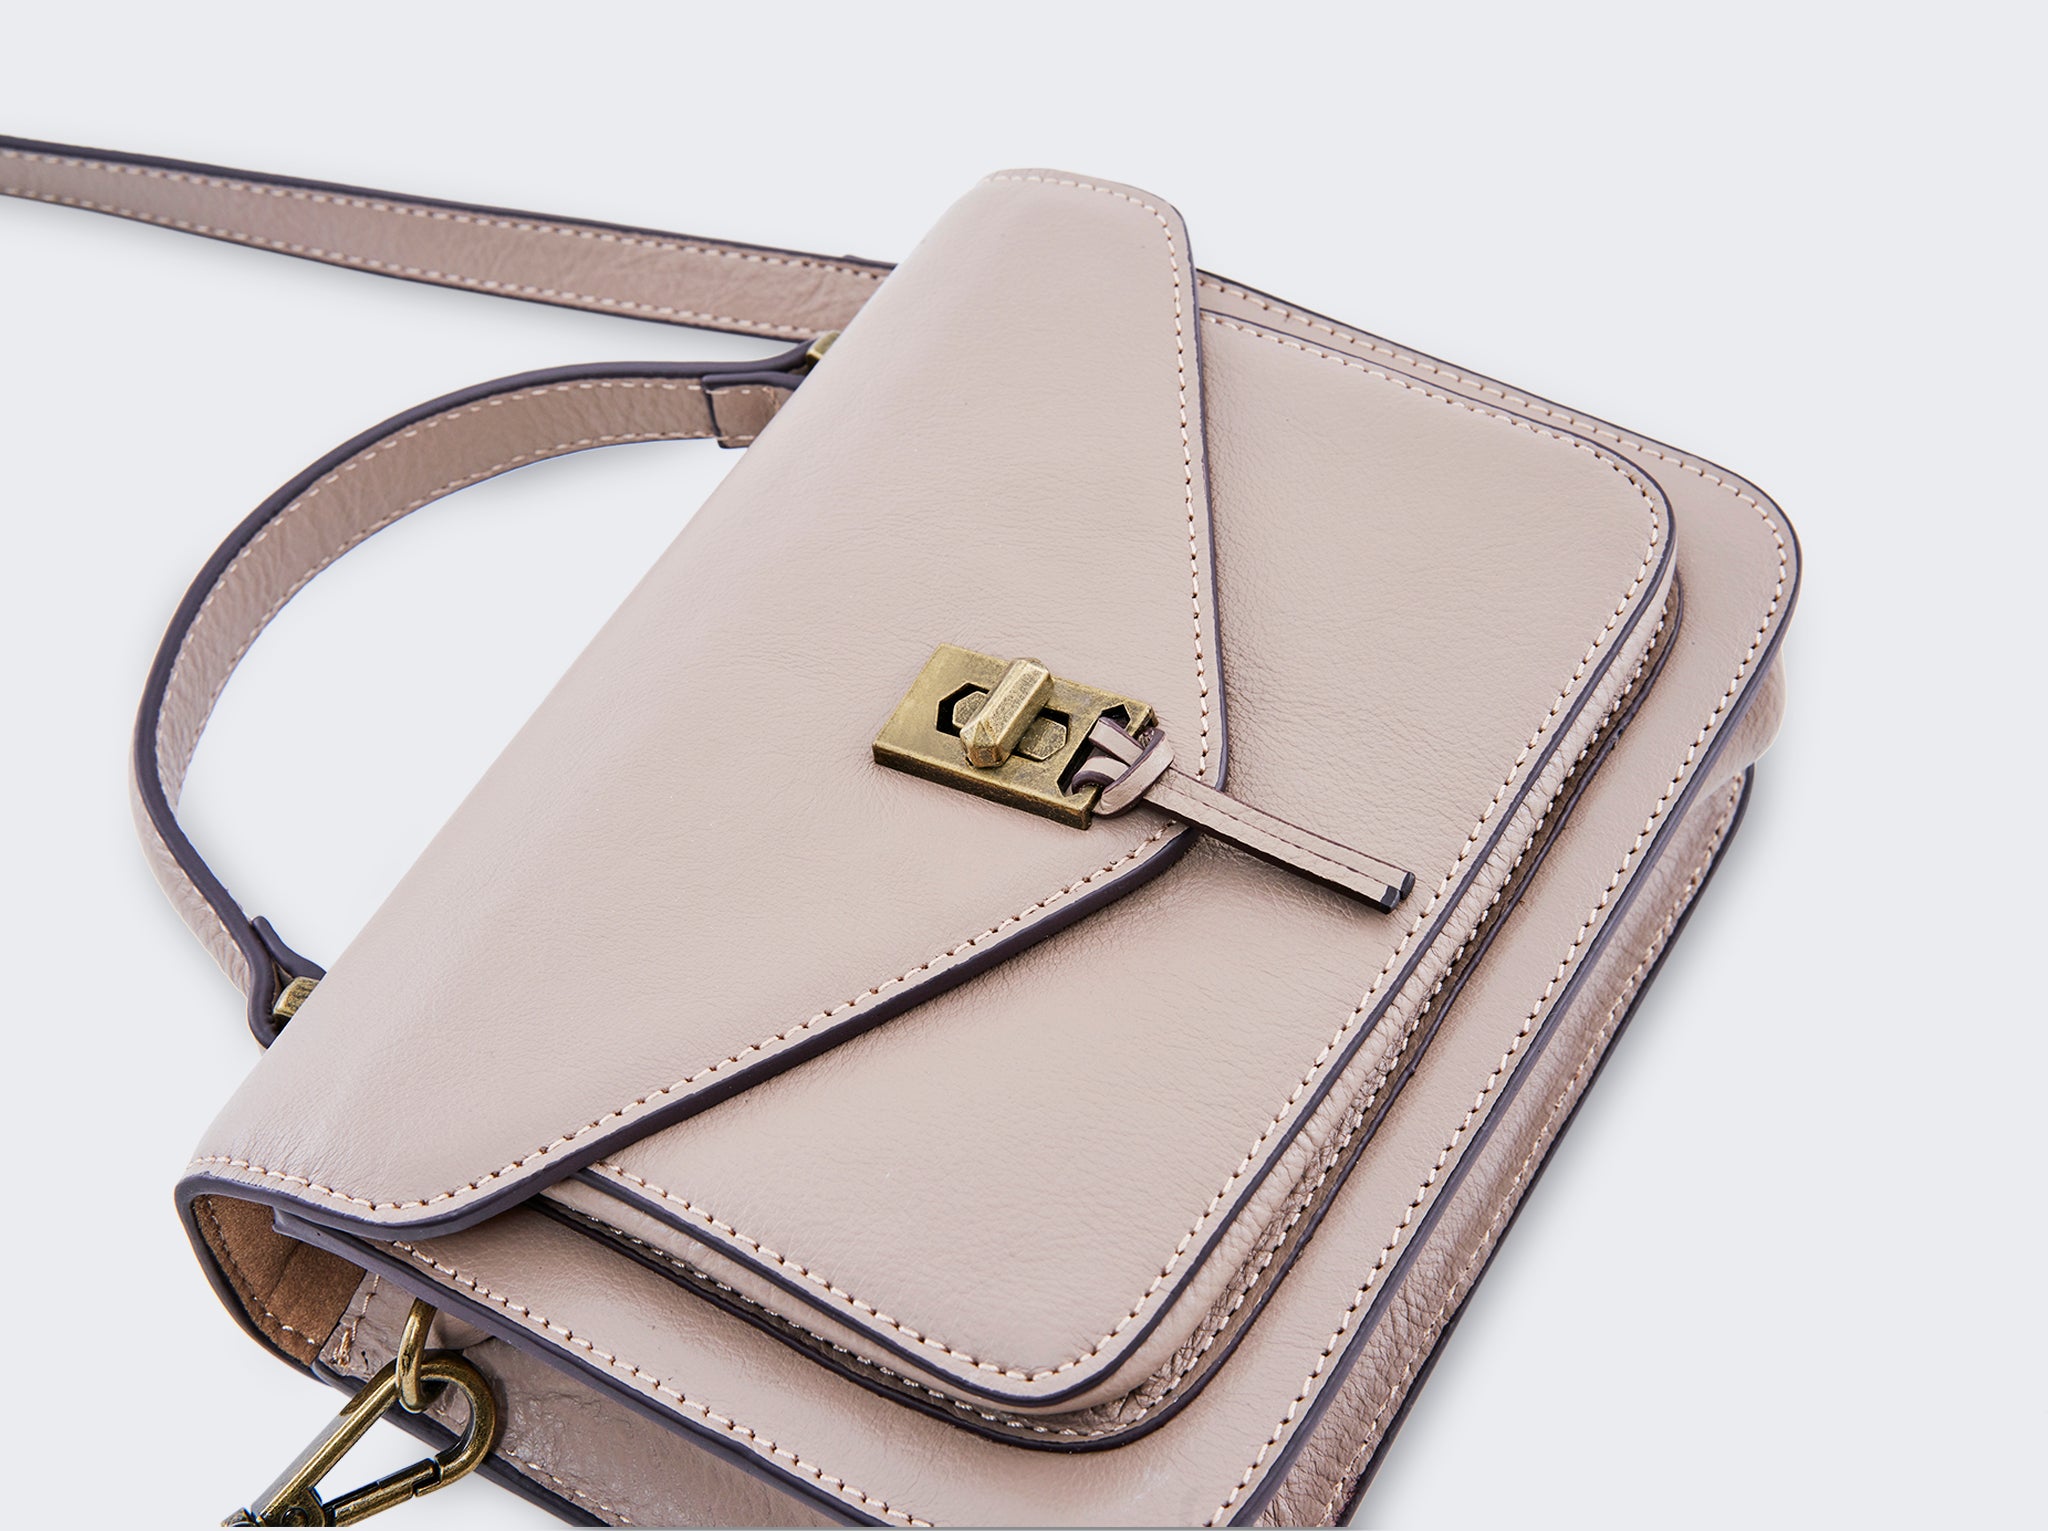 The Neuilly Shoulder Bag in Beige Sable